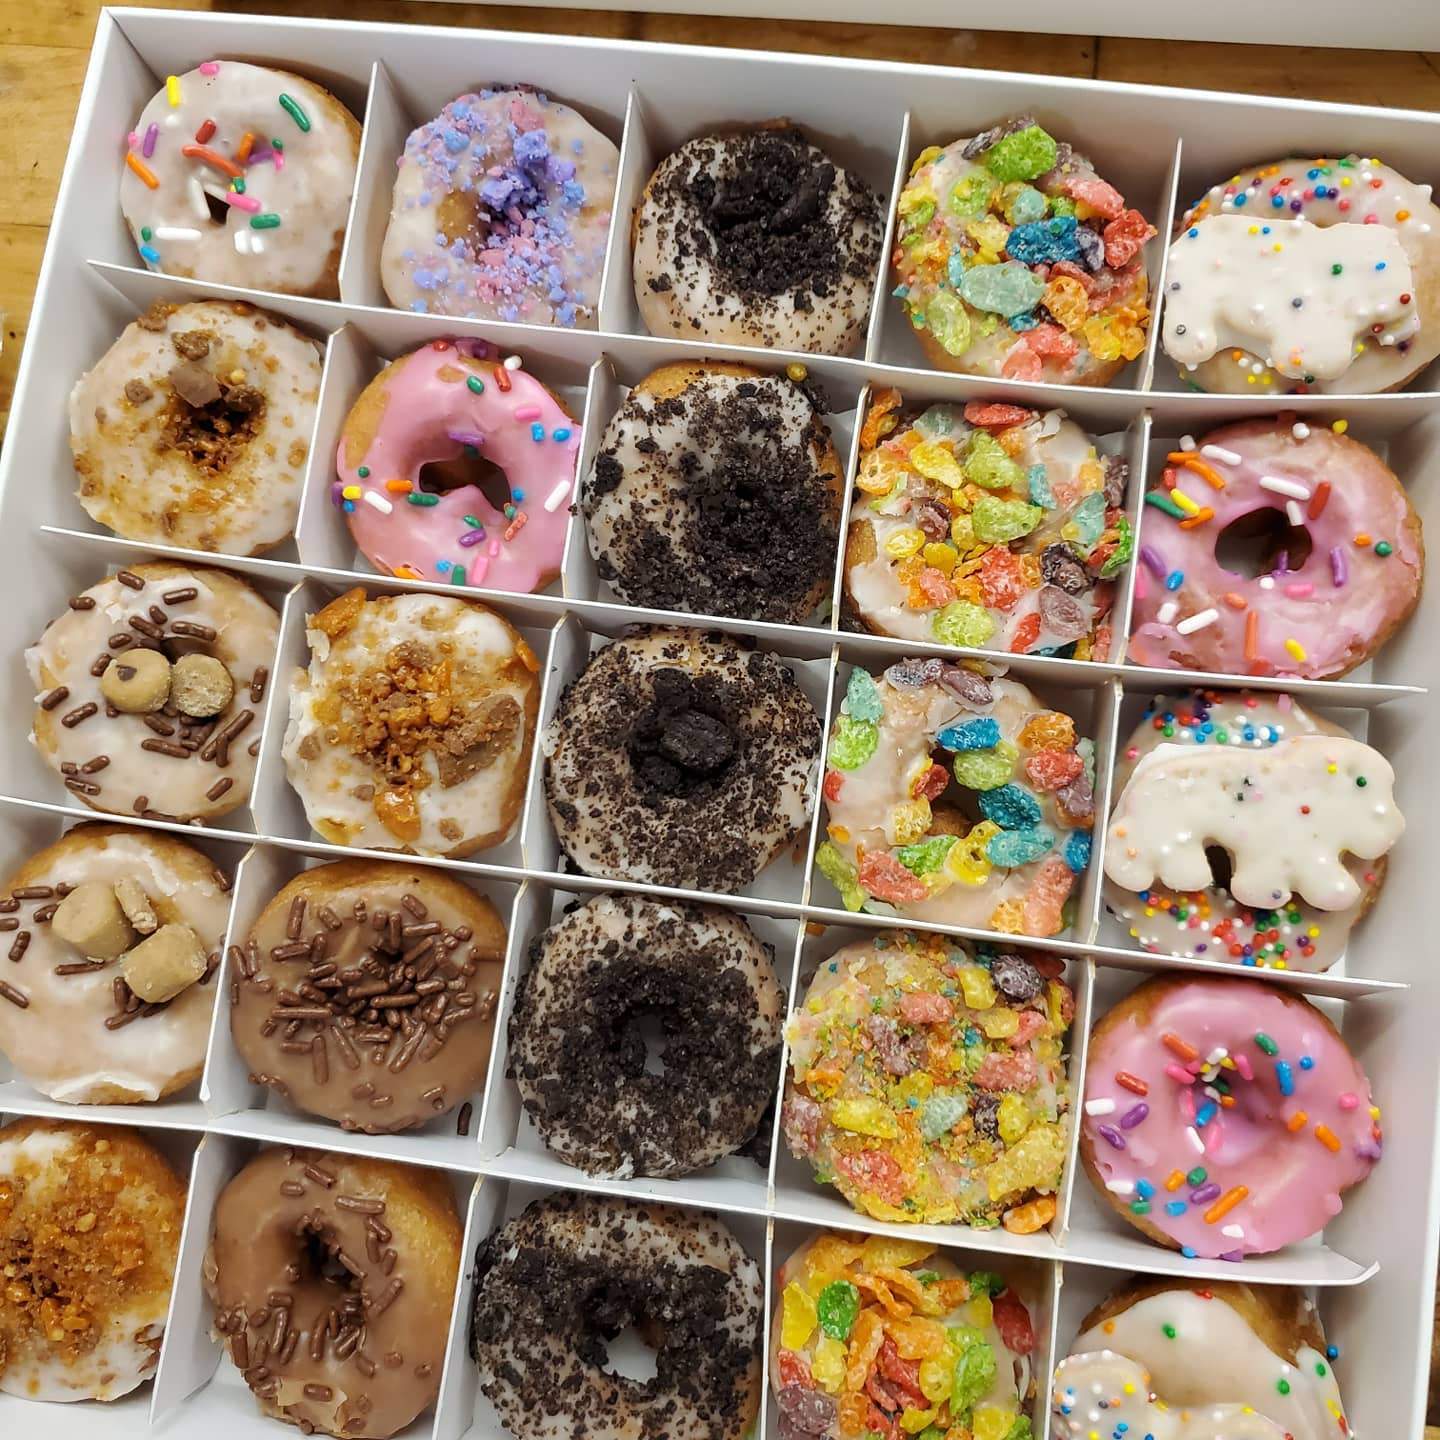 Miss Mini Donuts: Where to find this Kardashian-beloved shop tucked away in the Heights